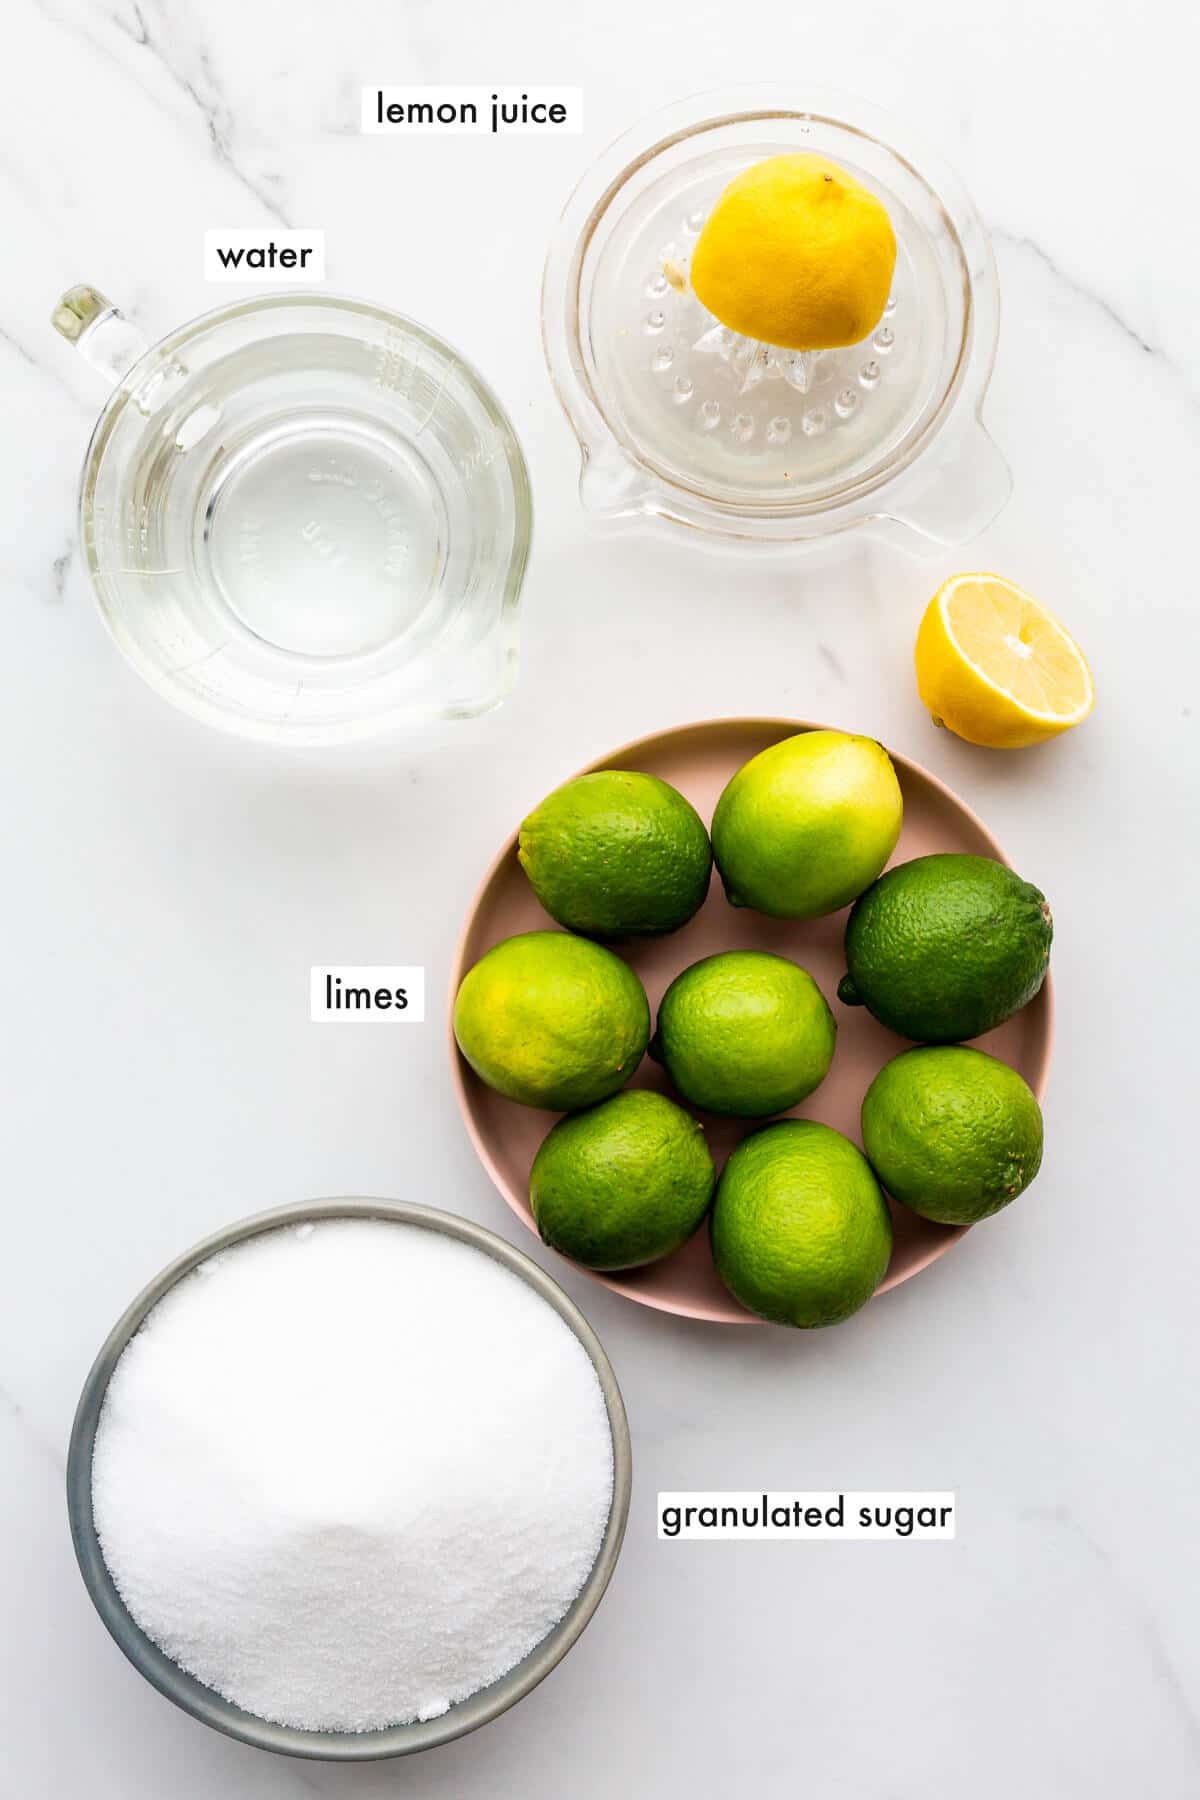 Ingredients to make lime marmalade from whole limes with just granulated sugar, water, and lemon juice, and no pectin added.